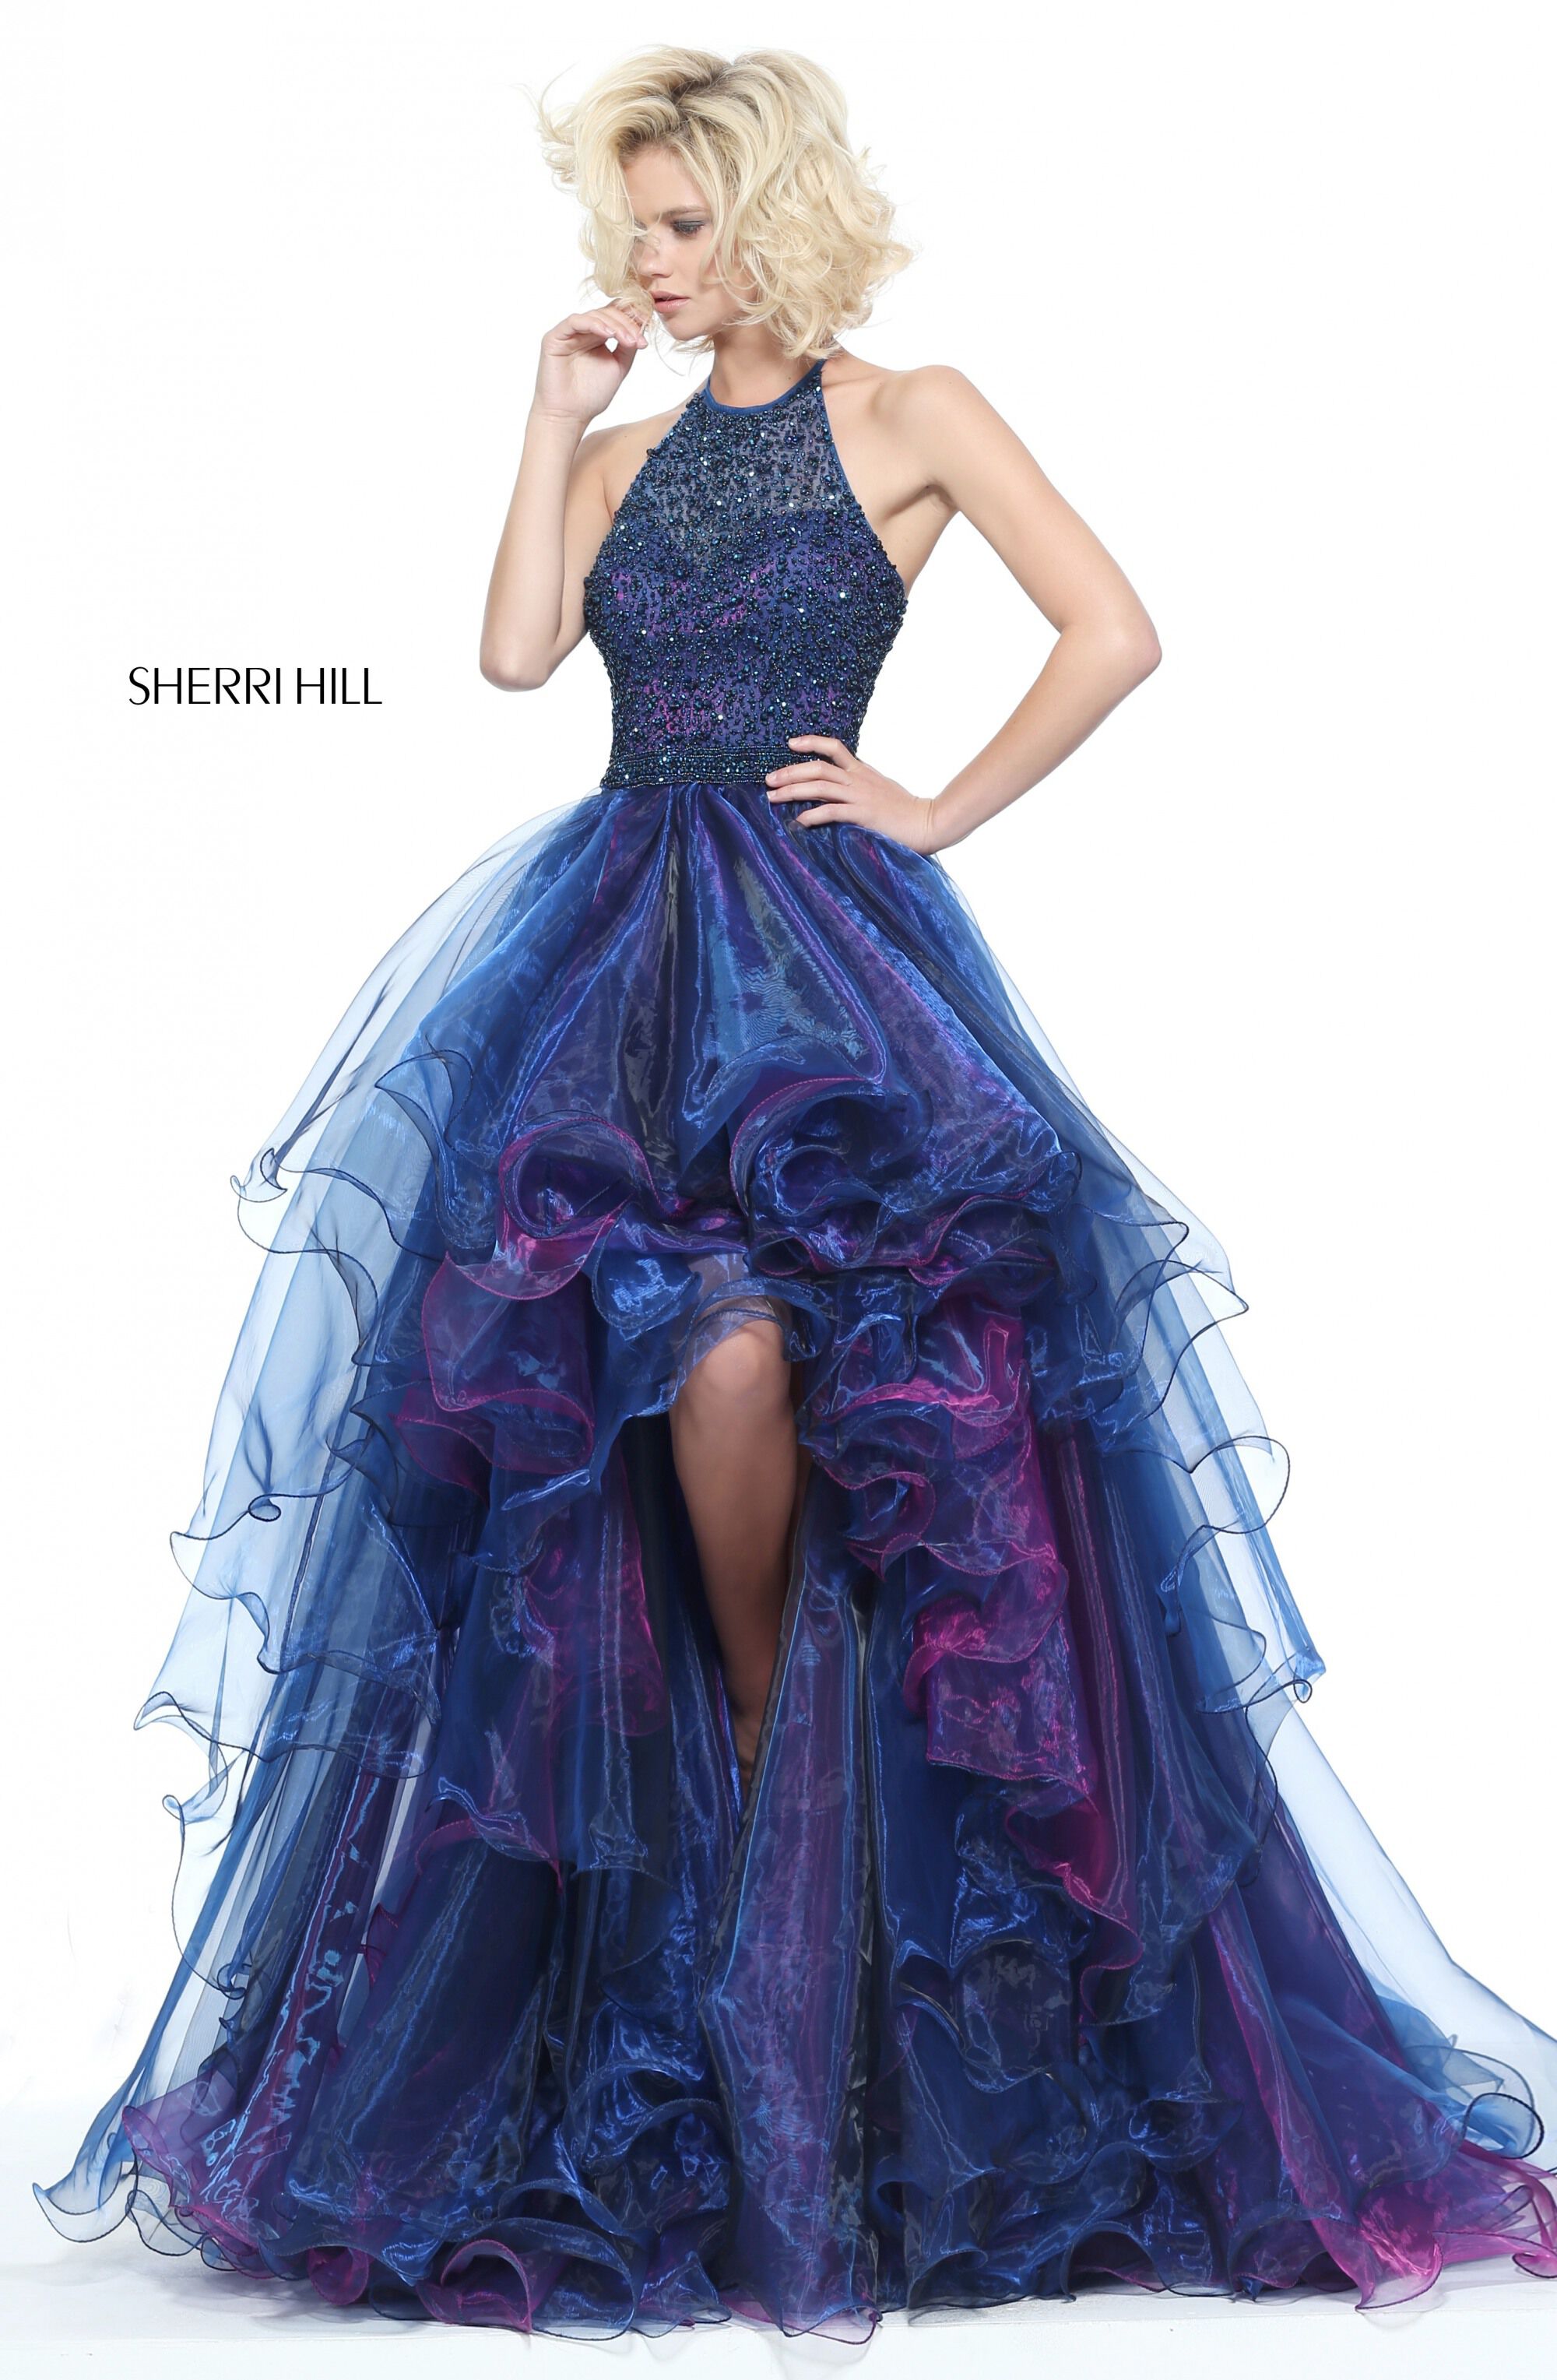 style № 51140 designed by SherriHill